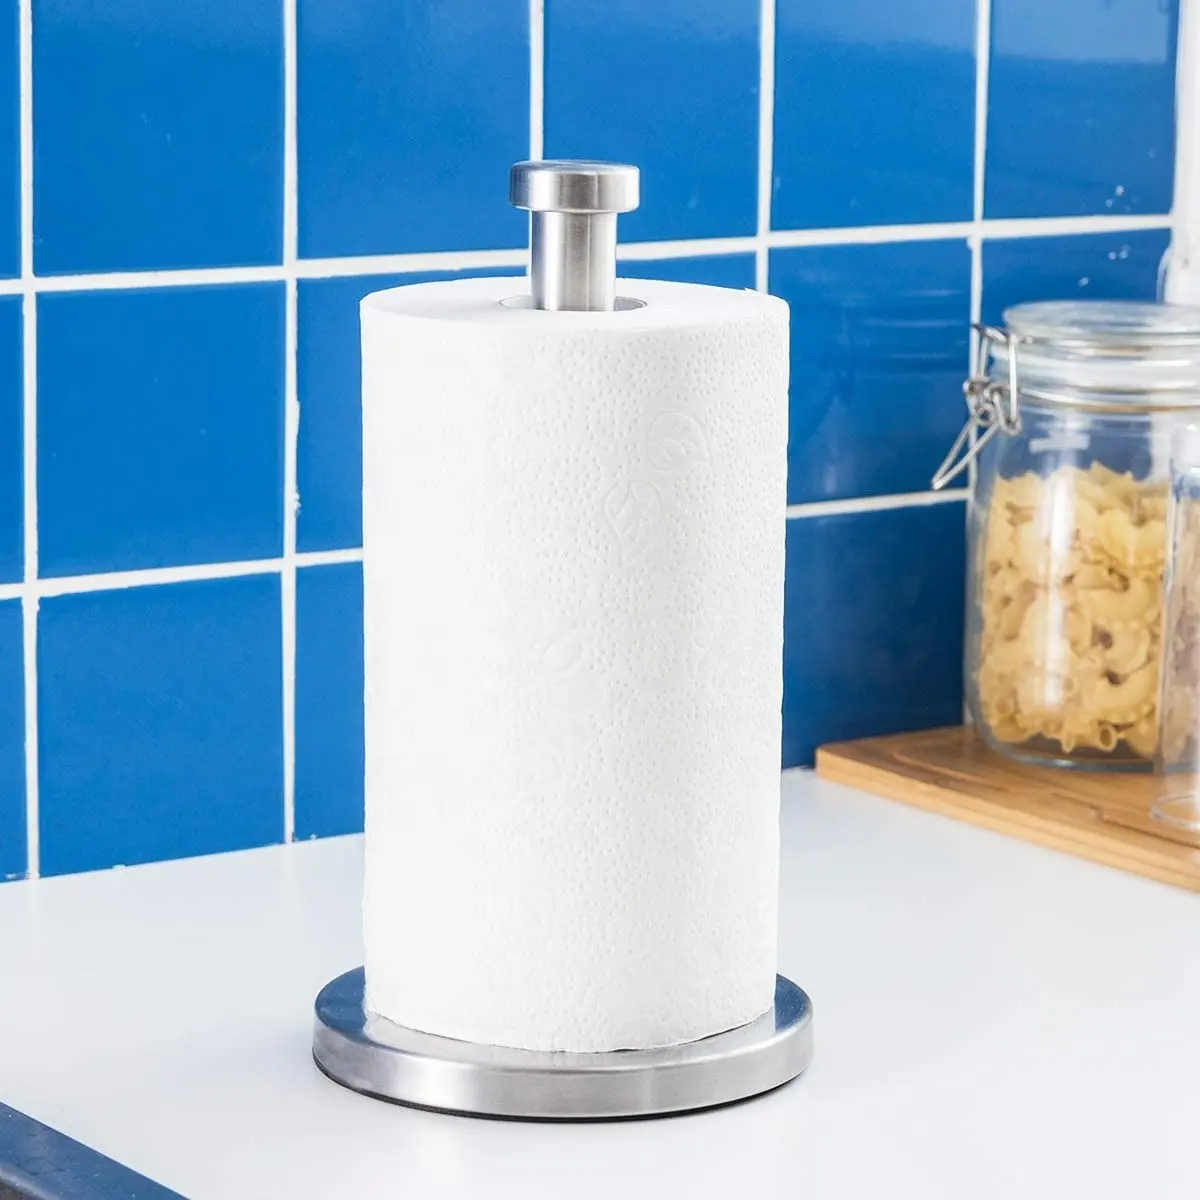 Stainless Steel Paper Towel Holder with Base Vertical Design Stand Countertop for Kitchen Bedroom